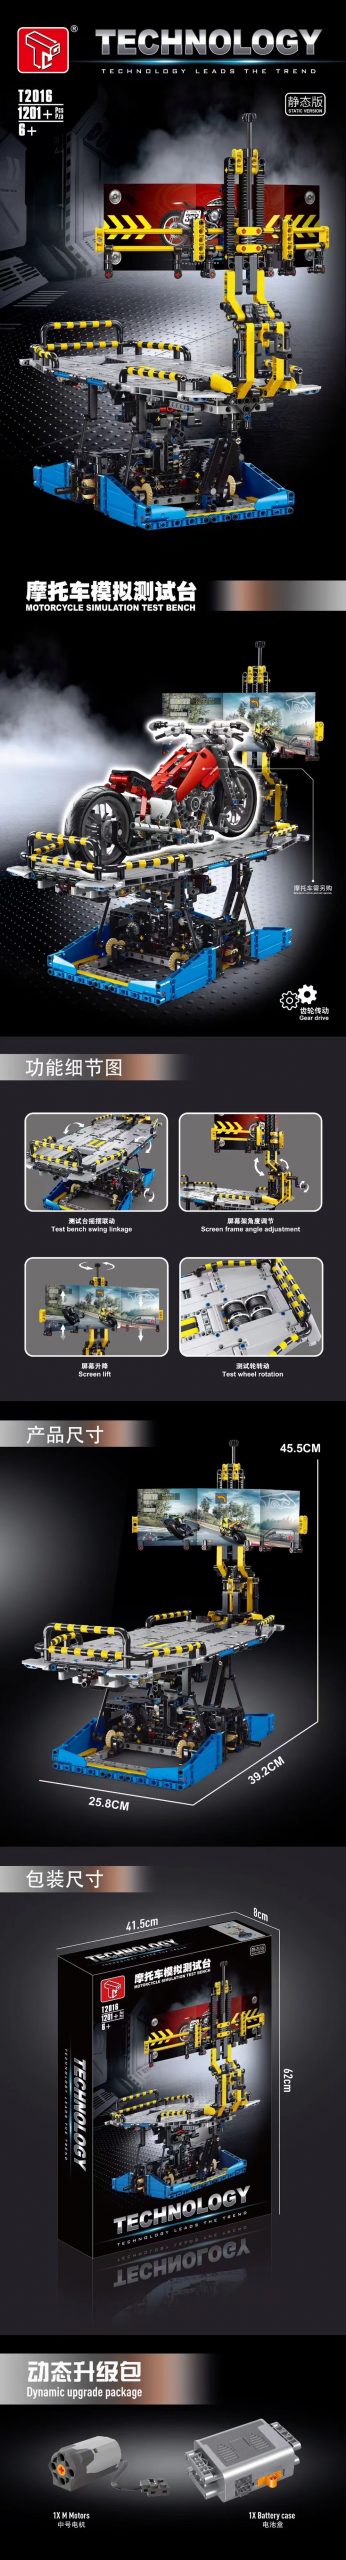 Motorcycle Simulation Test Bench TaiGaoLe T2016 Technic with 1201 Pieces